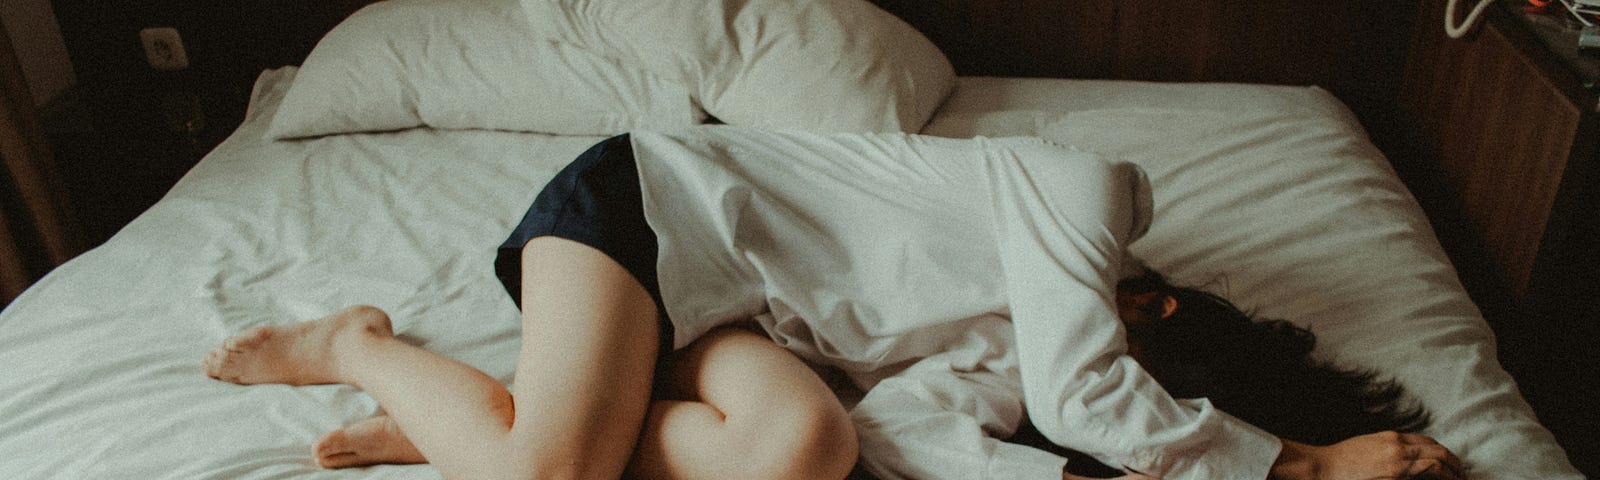 Girl curled up on an unmade bed with her arms over her face.